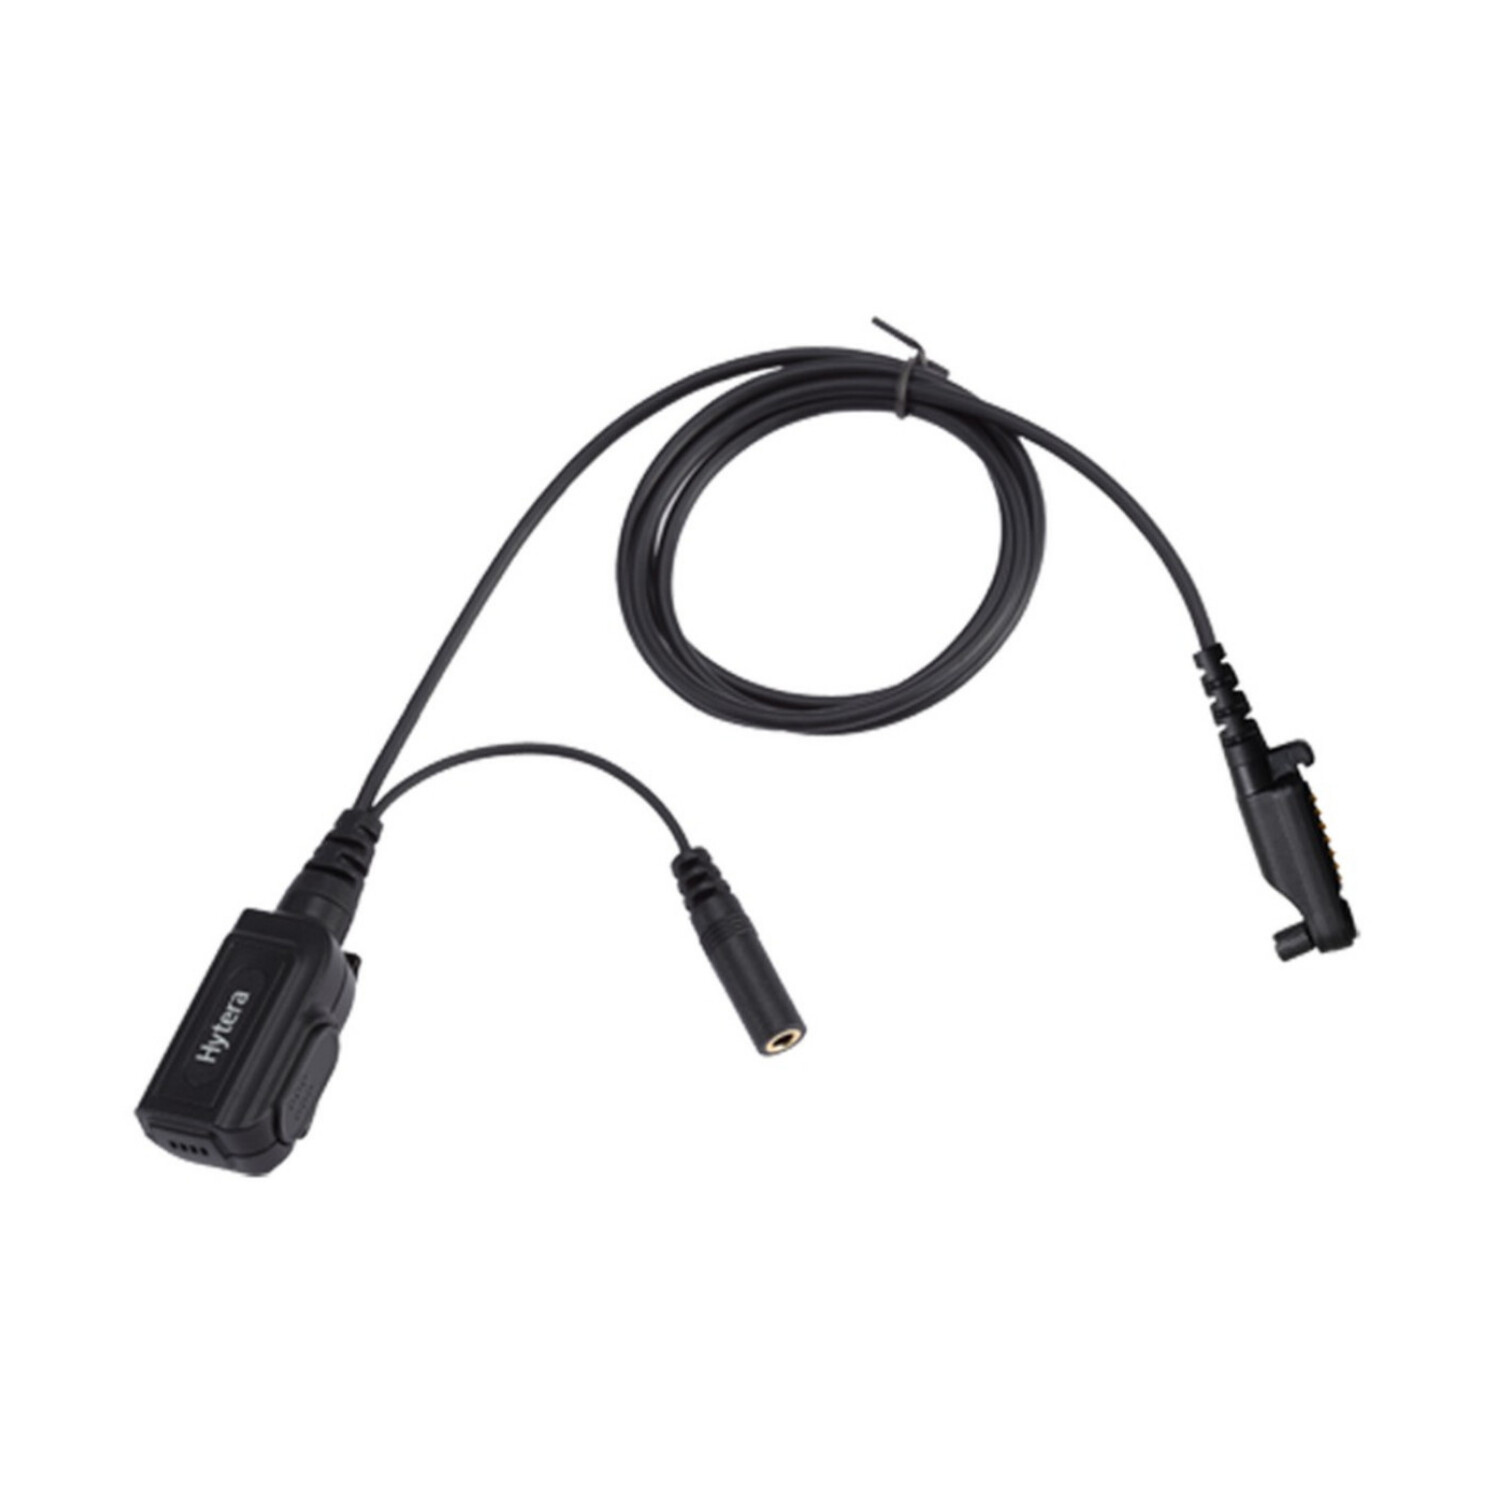 Hytera Microphone Cable with PTT used with receive-only earpiece